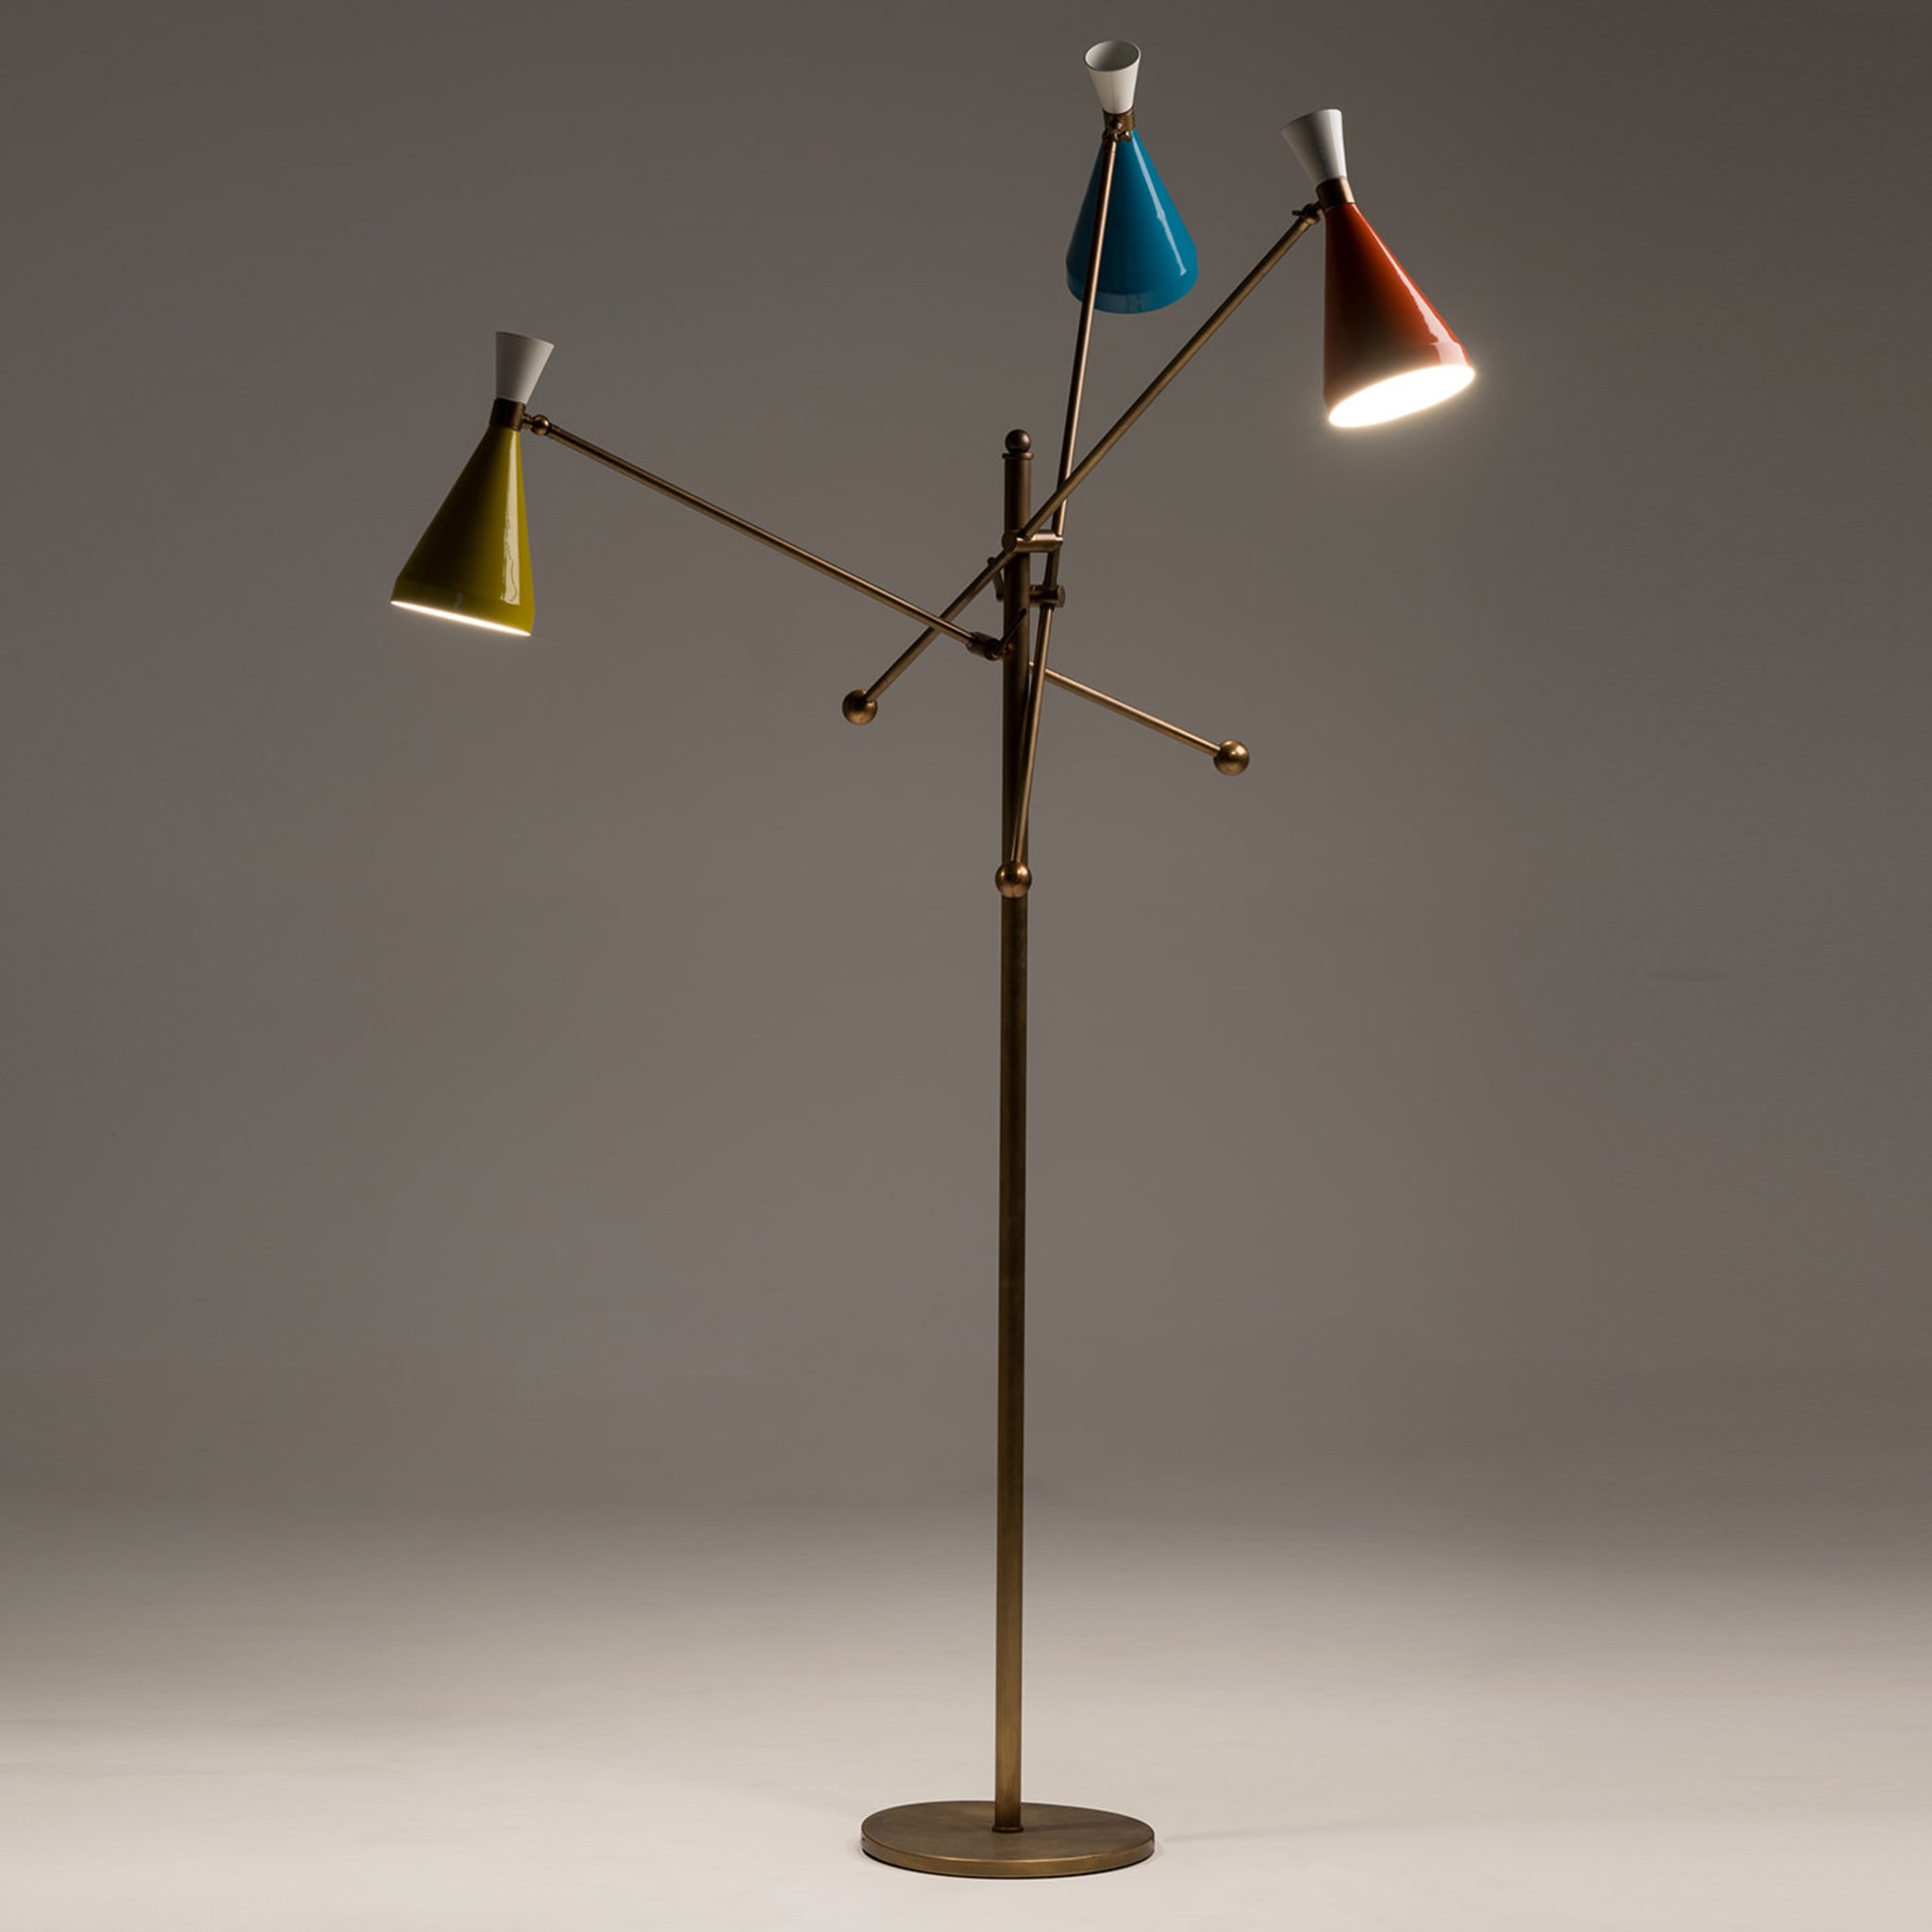 Flipper floor lamp by Marco and Giulio Mantellassi - Alternative view 1